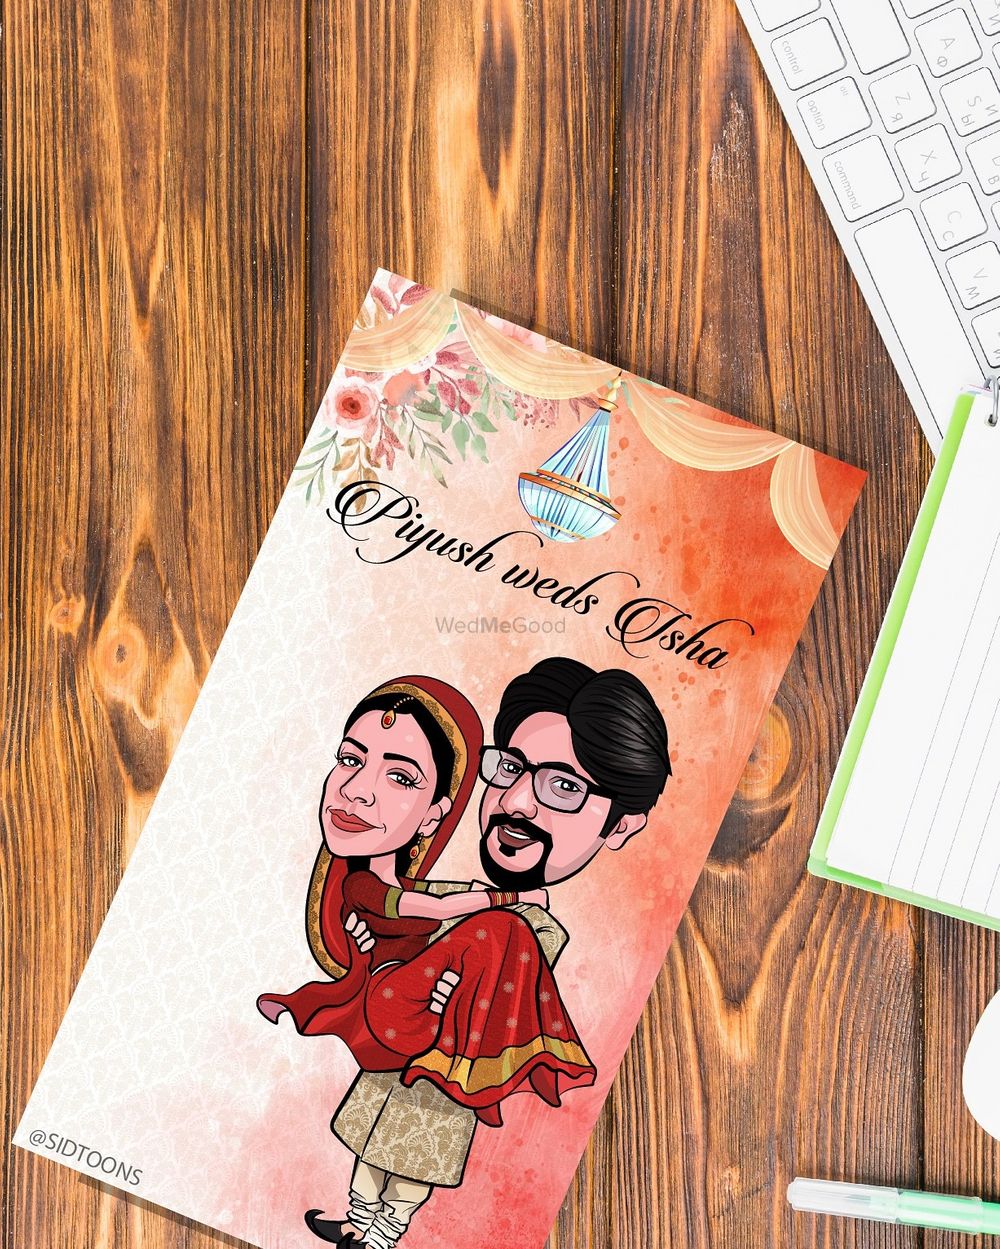 Photo By Sidtoons - Invitations